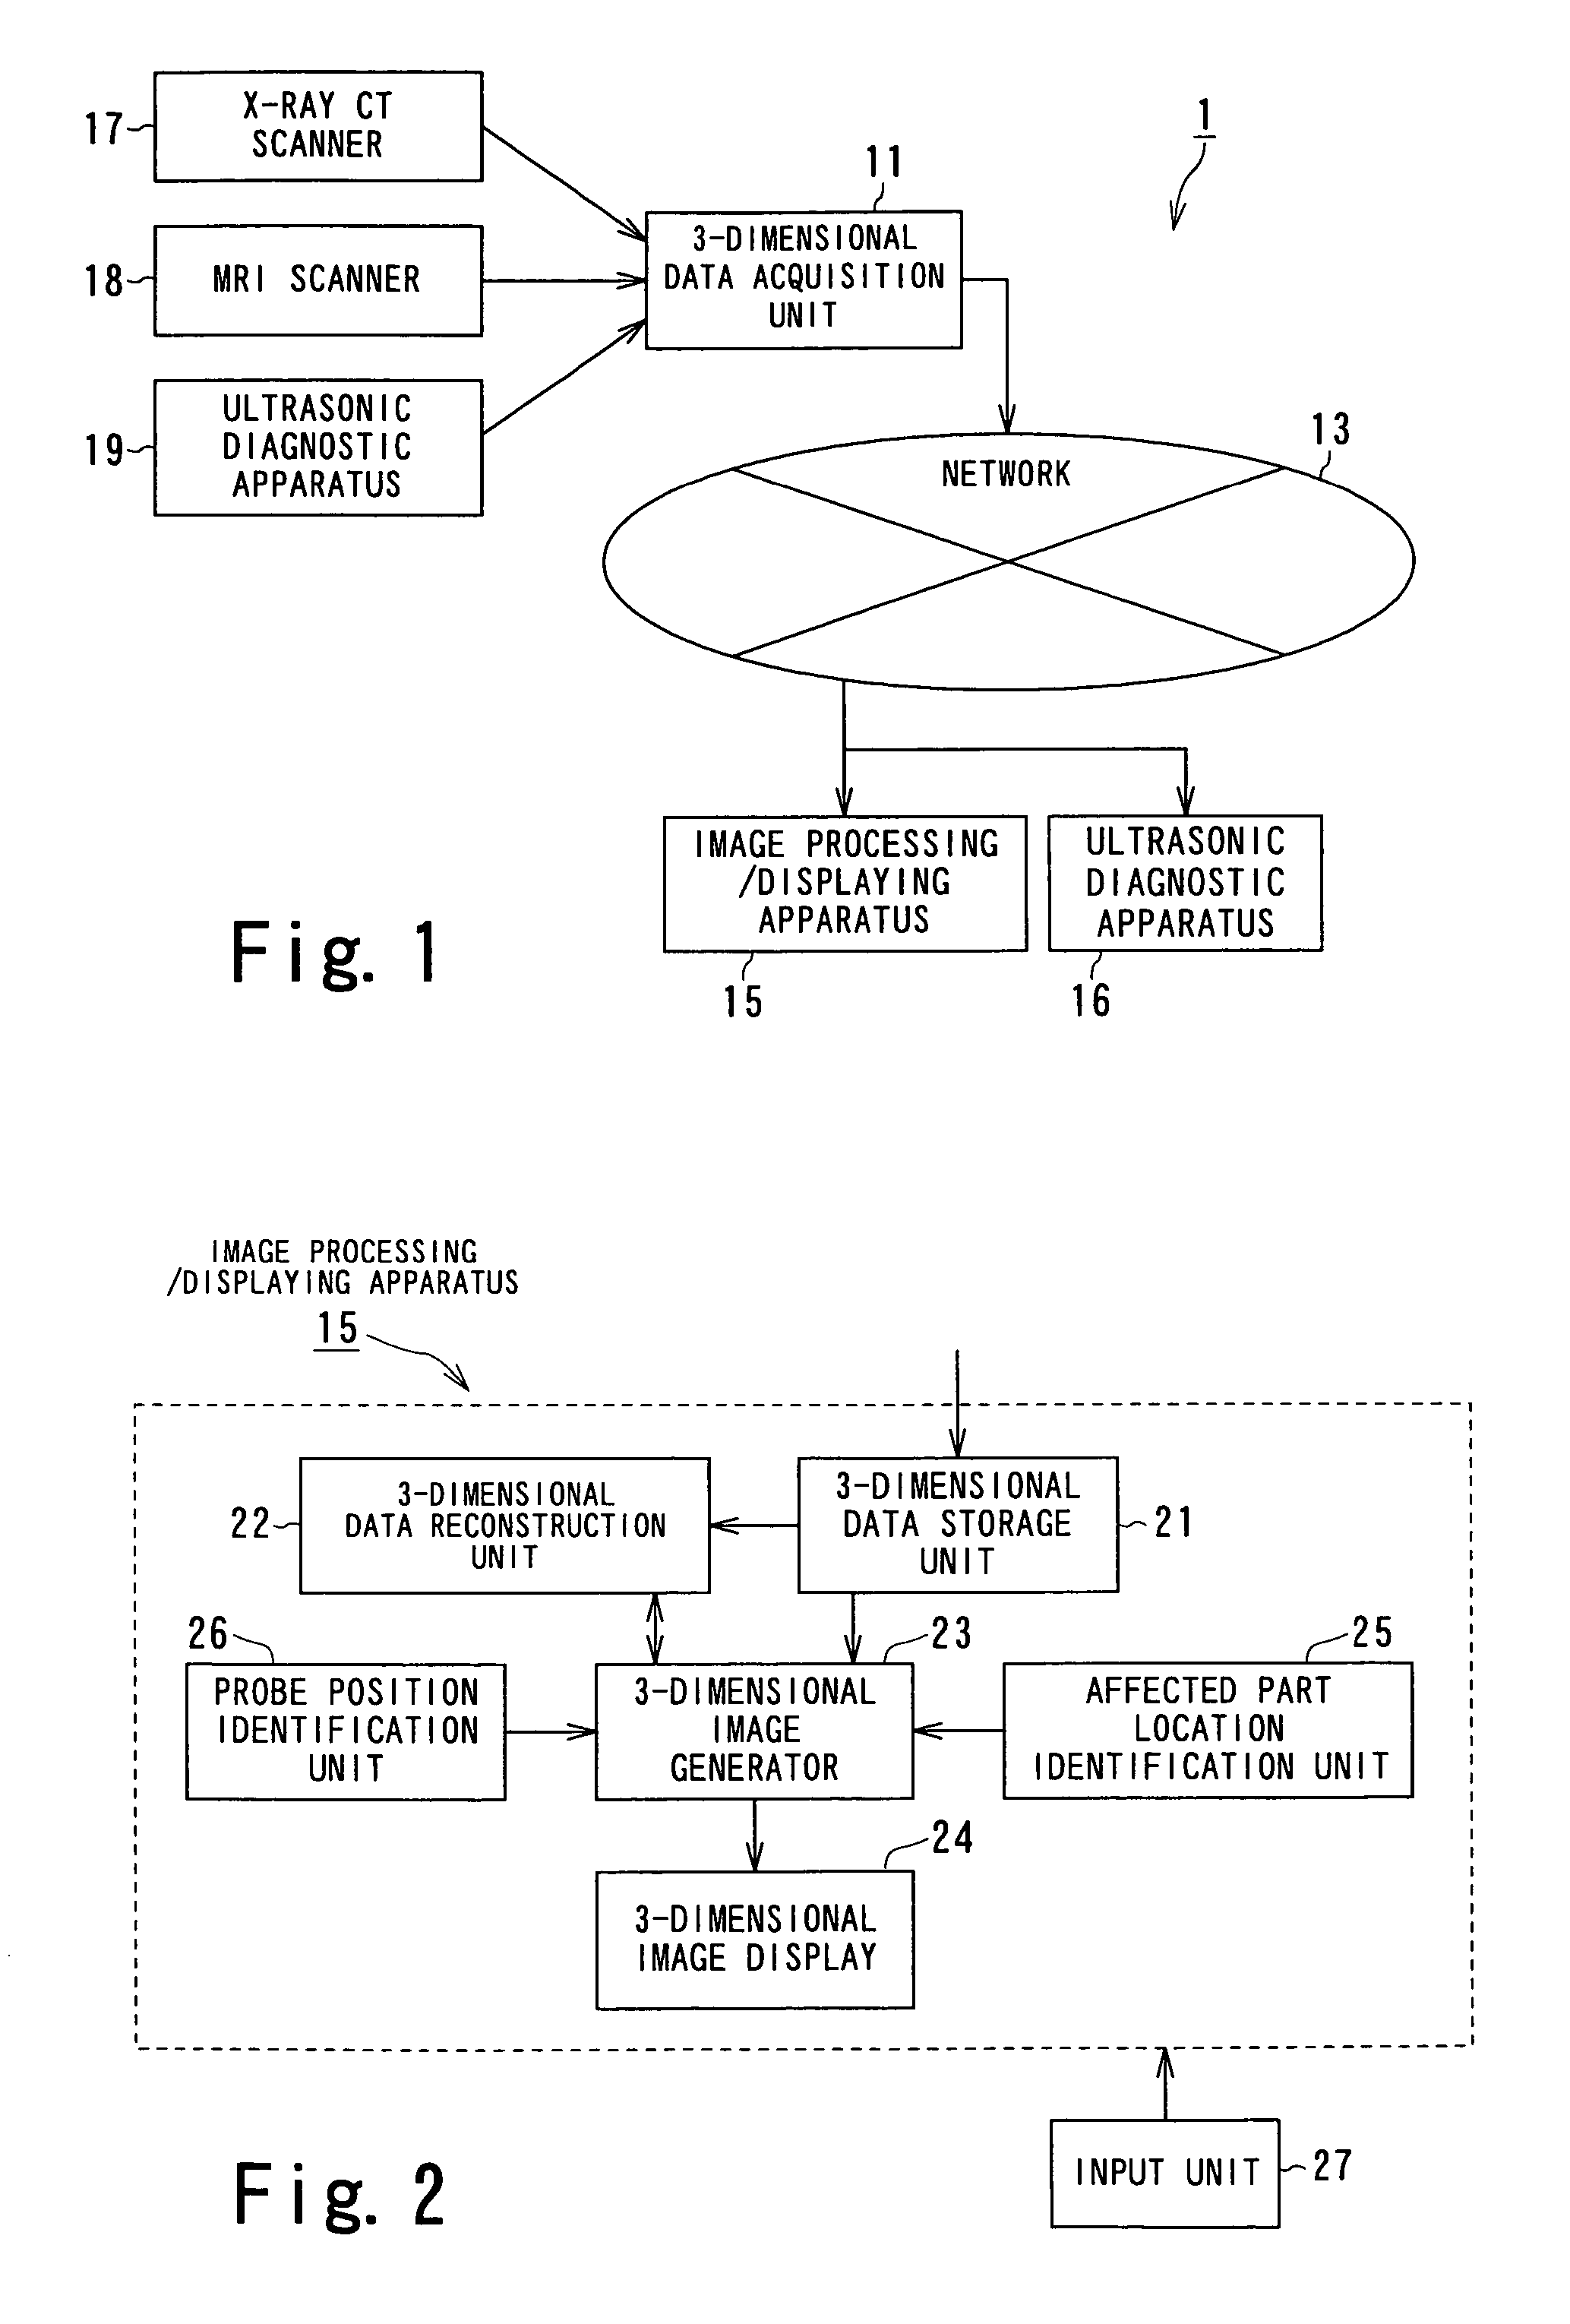 Image processing/displaying apparatus having free moving control unit and limited moving control unit and method of controlling the same